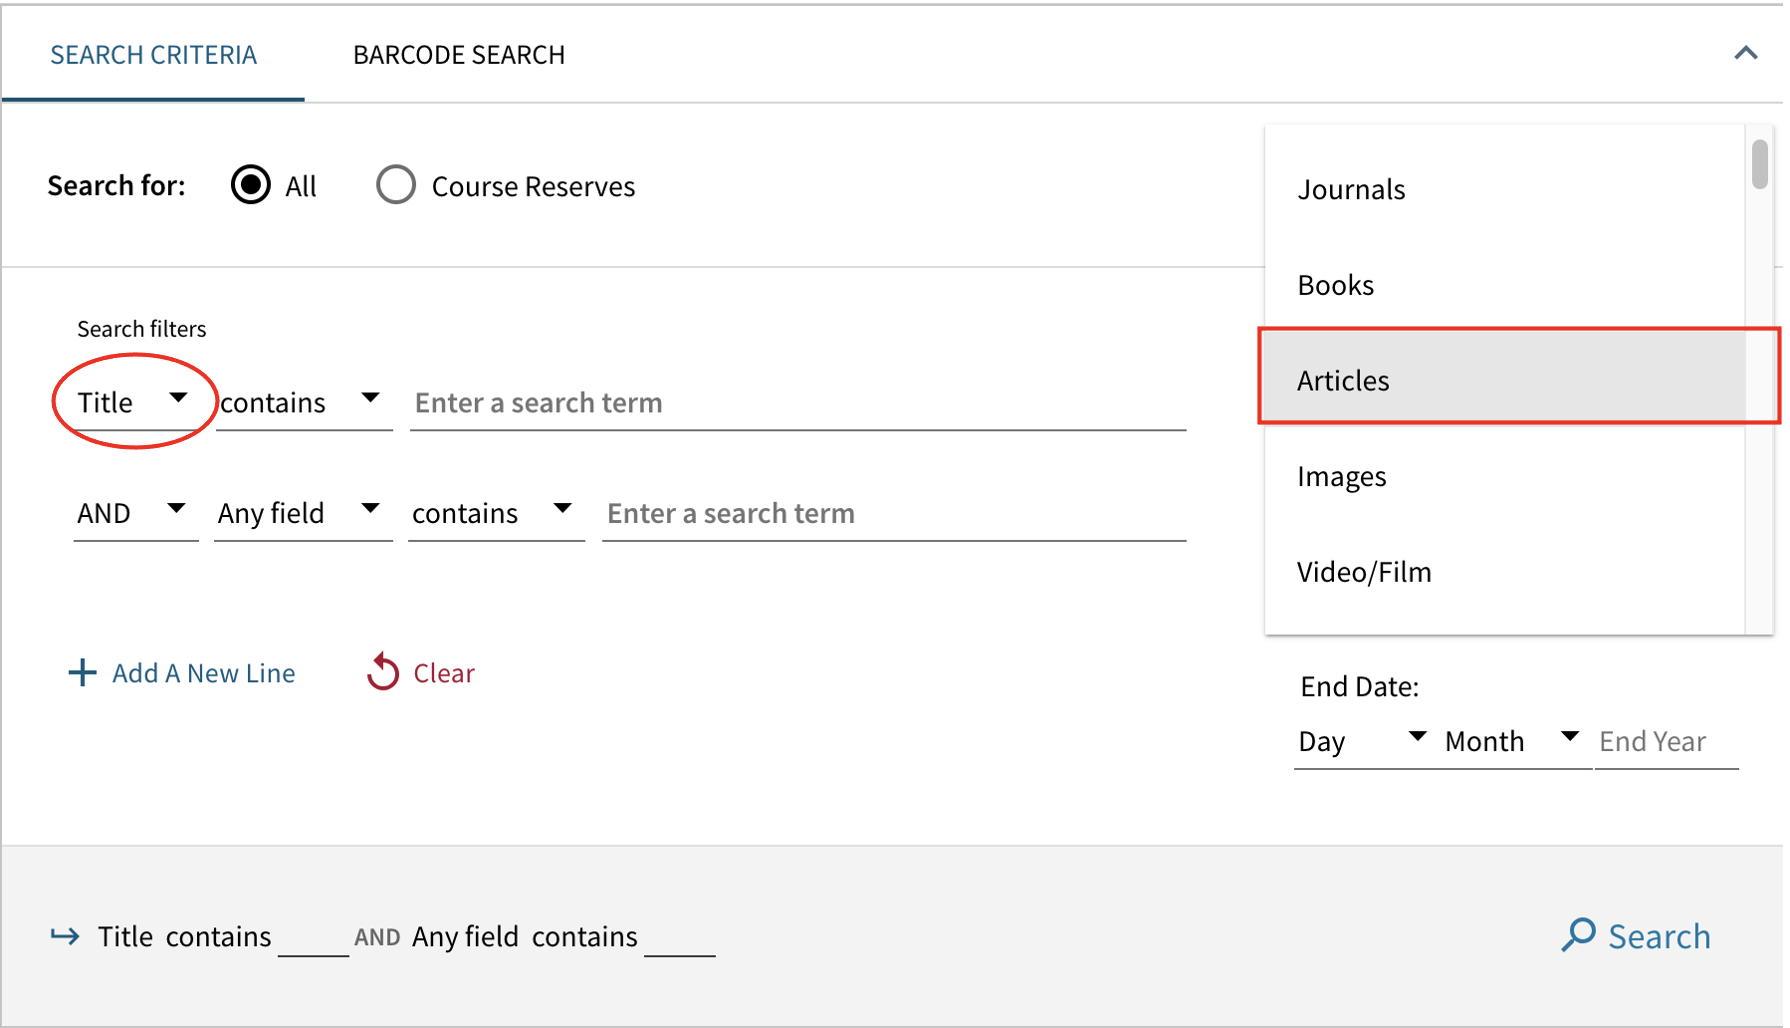 Advanced search limited to articles and title